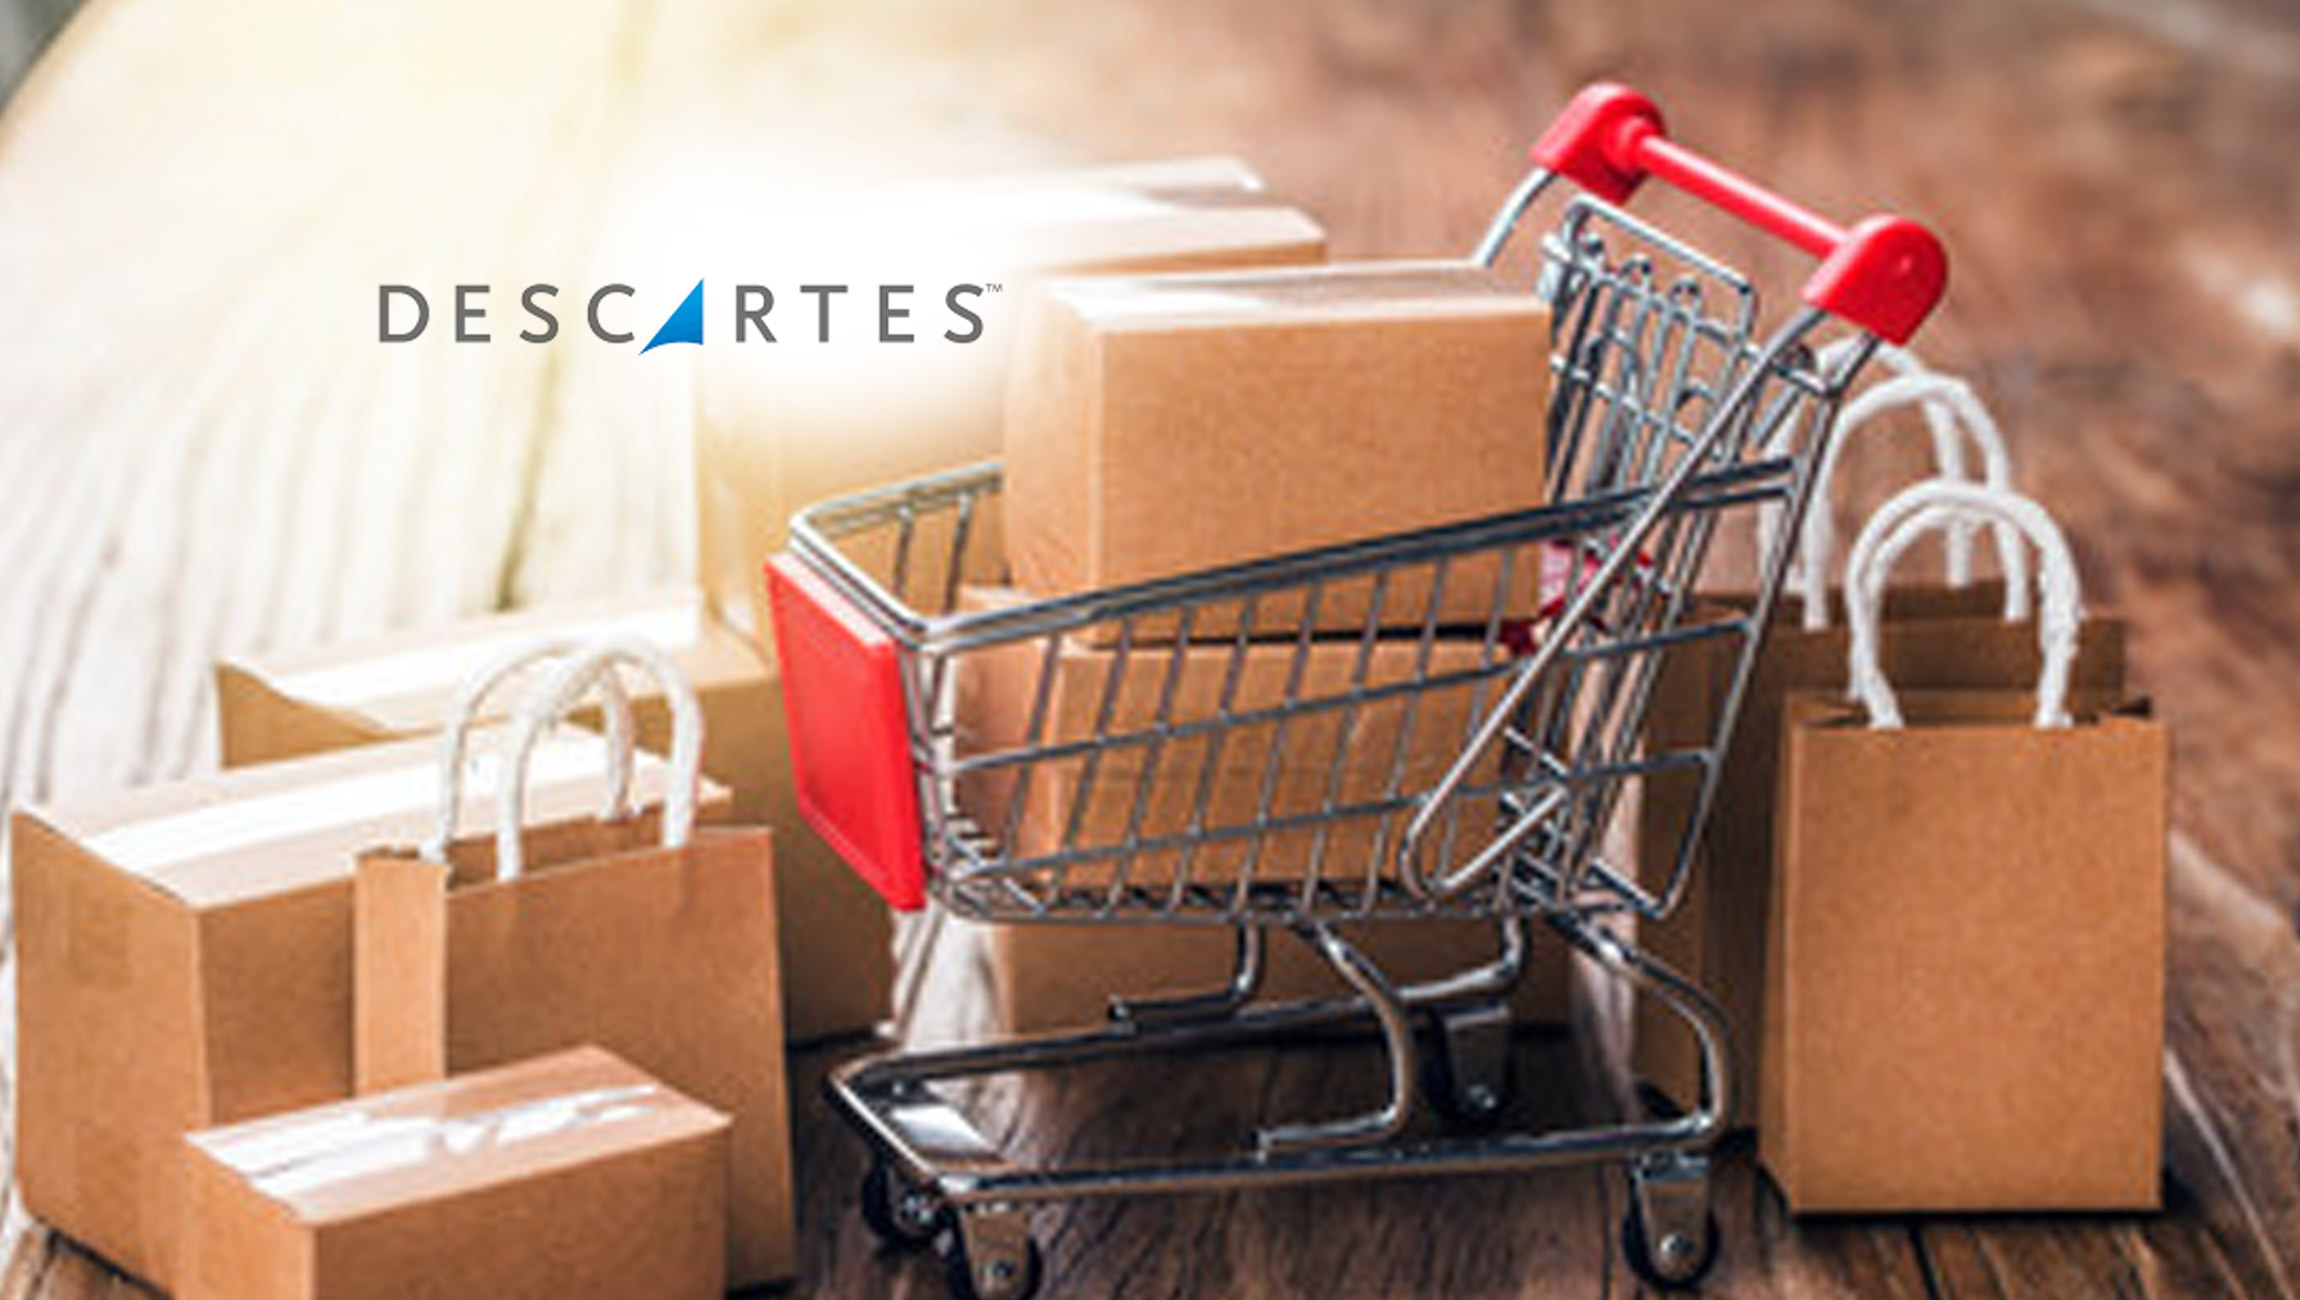 Descartes-Ecommerce-Study-Reveals-Mixed-Consumer-Sentiment-on-Retailers’-Home-Delivery-Performance